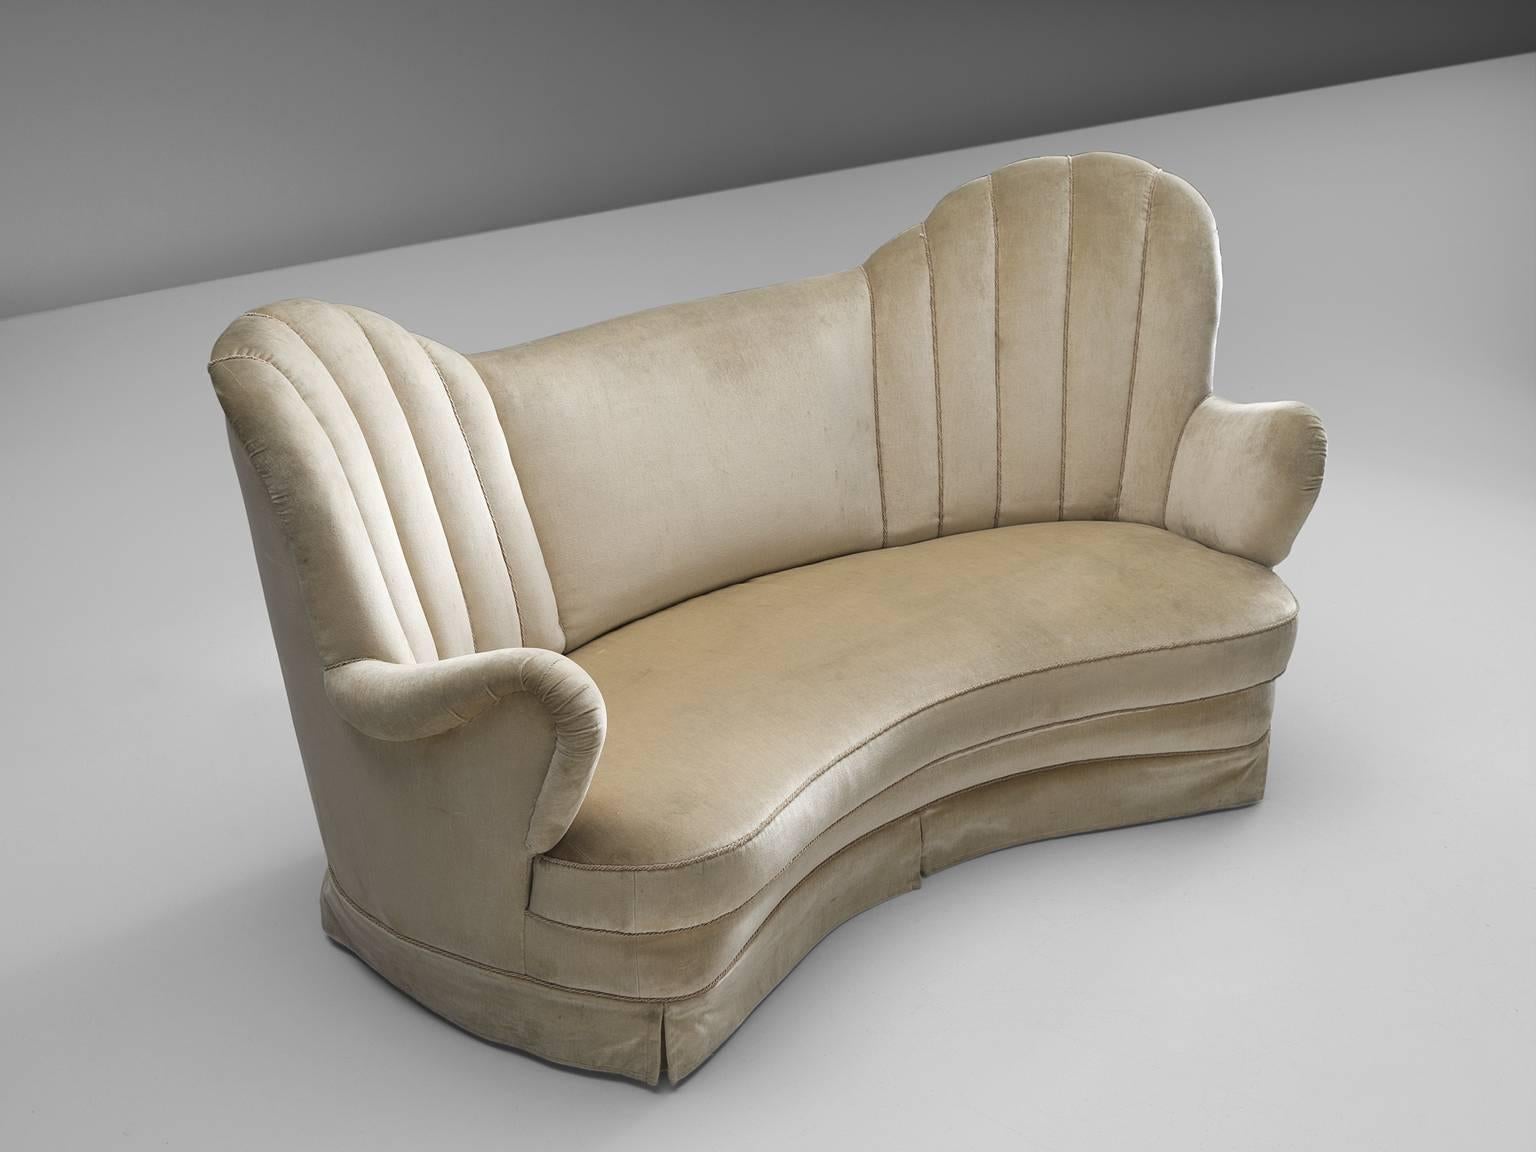 Sofa, beige off-white fabric, Italy, 1950s.

This eye-catching vibrant settee features a sculptural form with two higher sectioned ends on each side of the backrest. These high-ends resemble wings and the two armrests seems to bear the aesthetics of